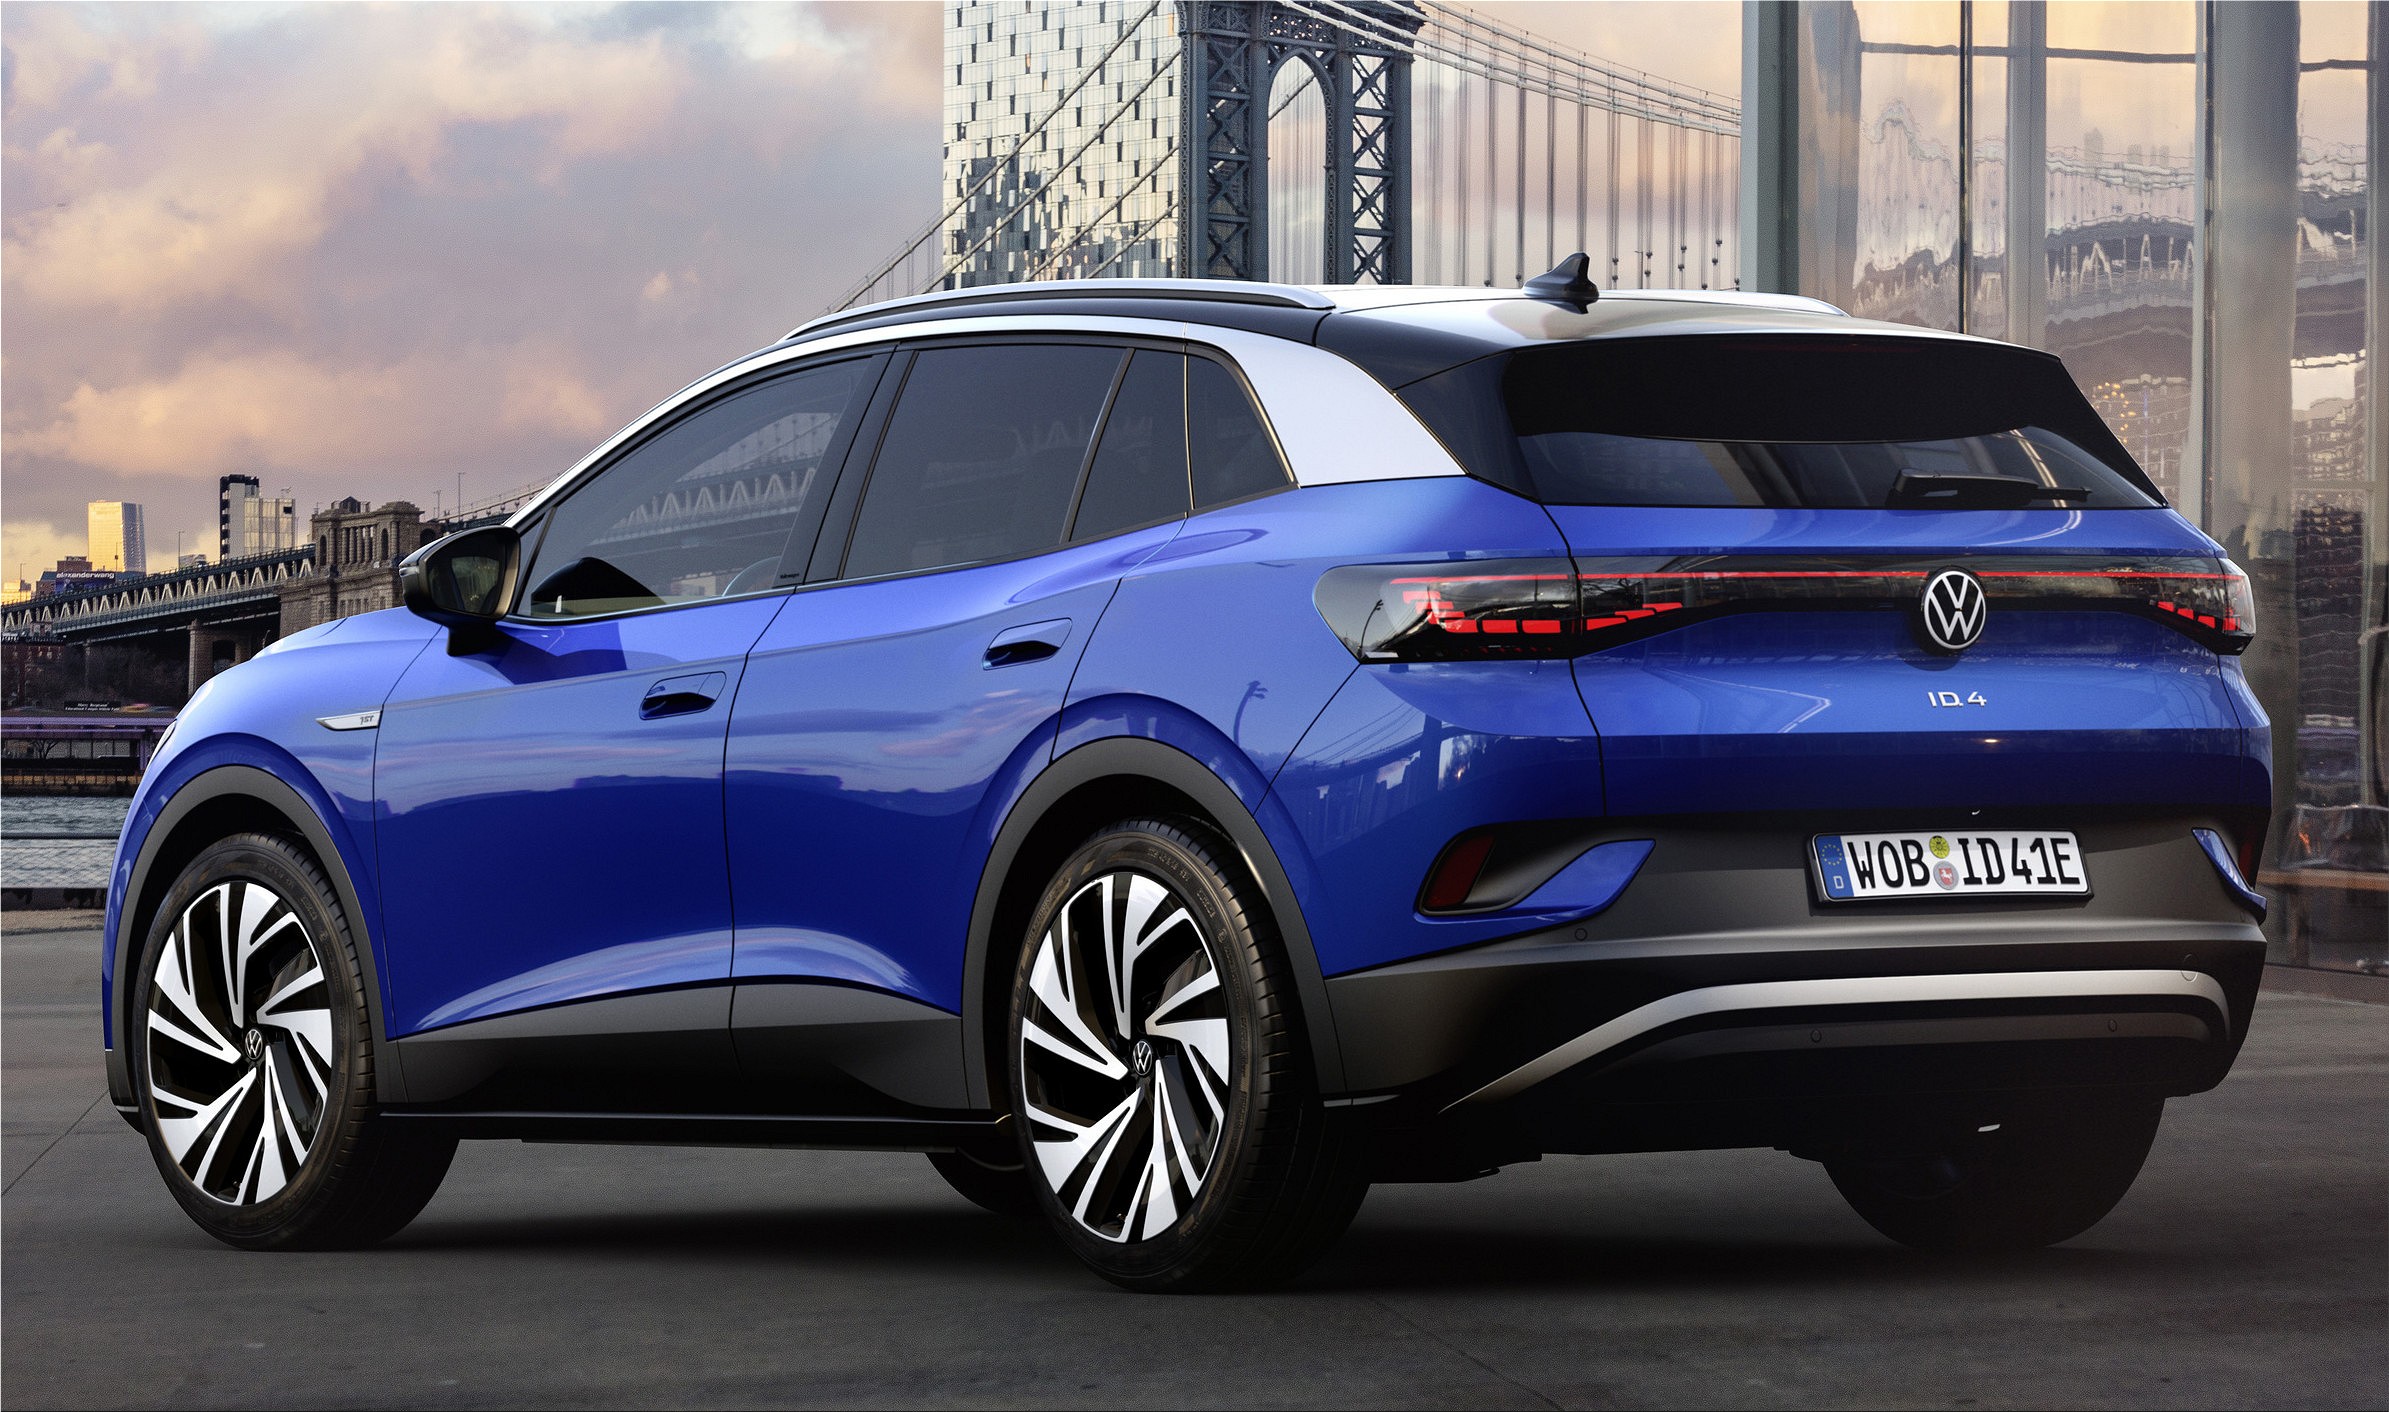 The new Volkswagen ID.4 electric SUV has robust proportions |Electric